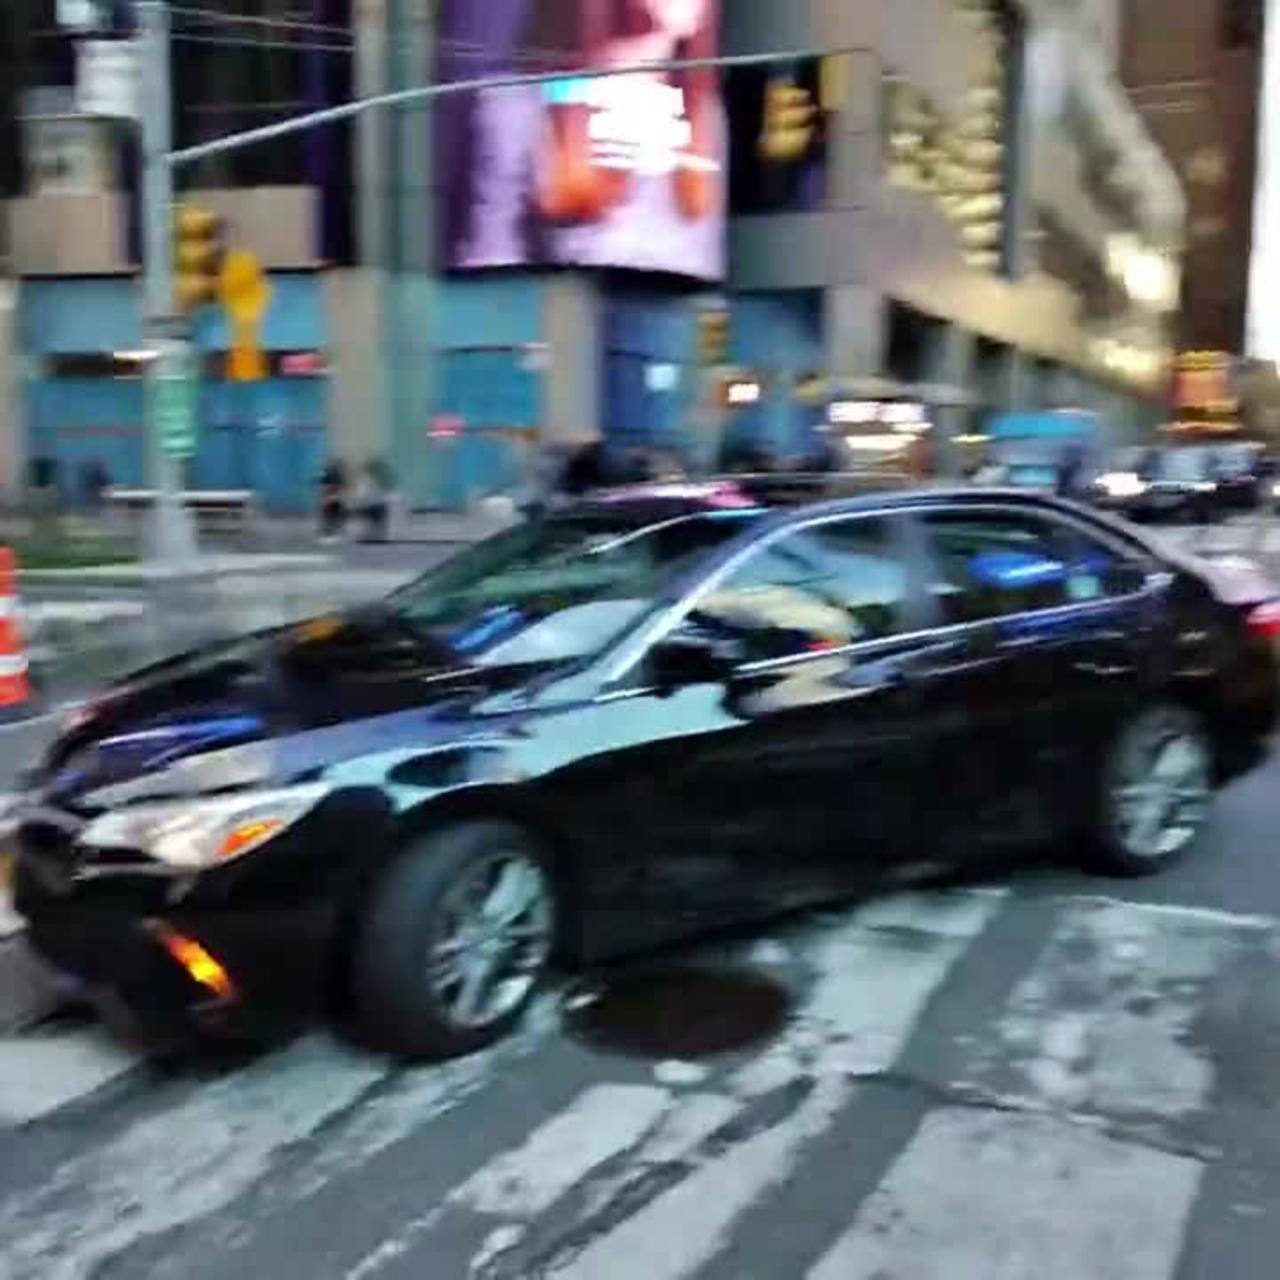 Huge bang / manhole explosion causes panic in New York's Times Square.